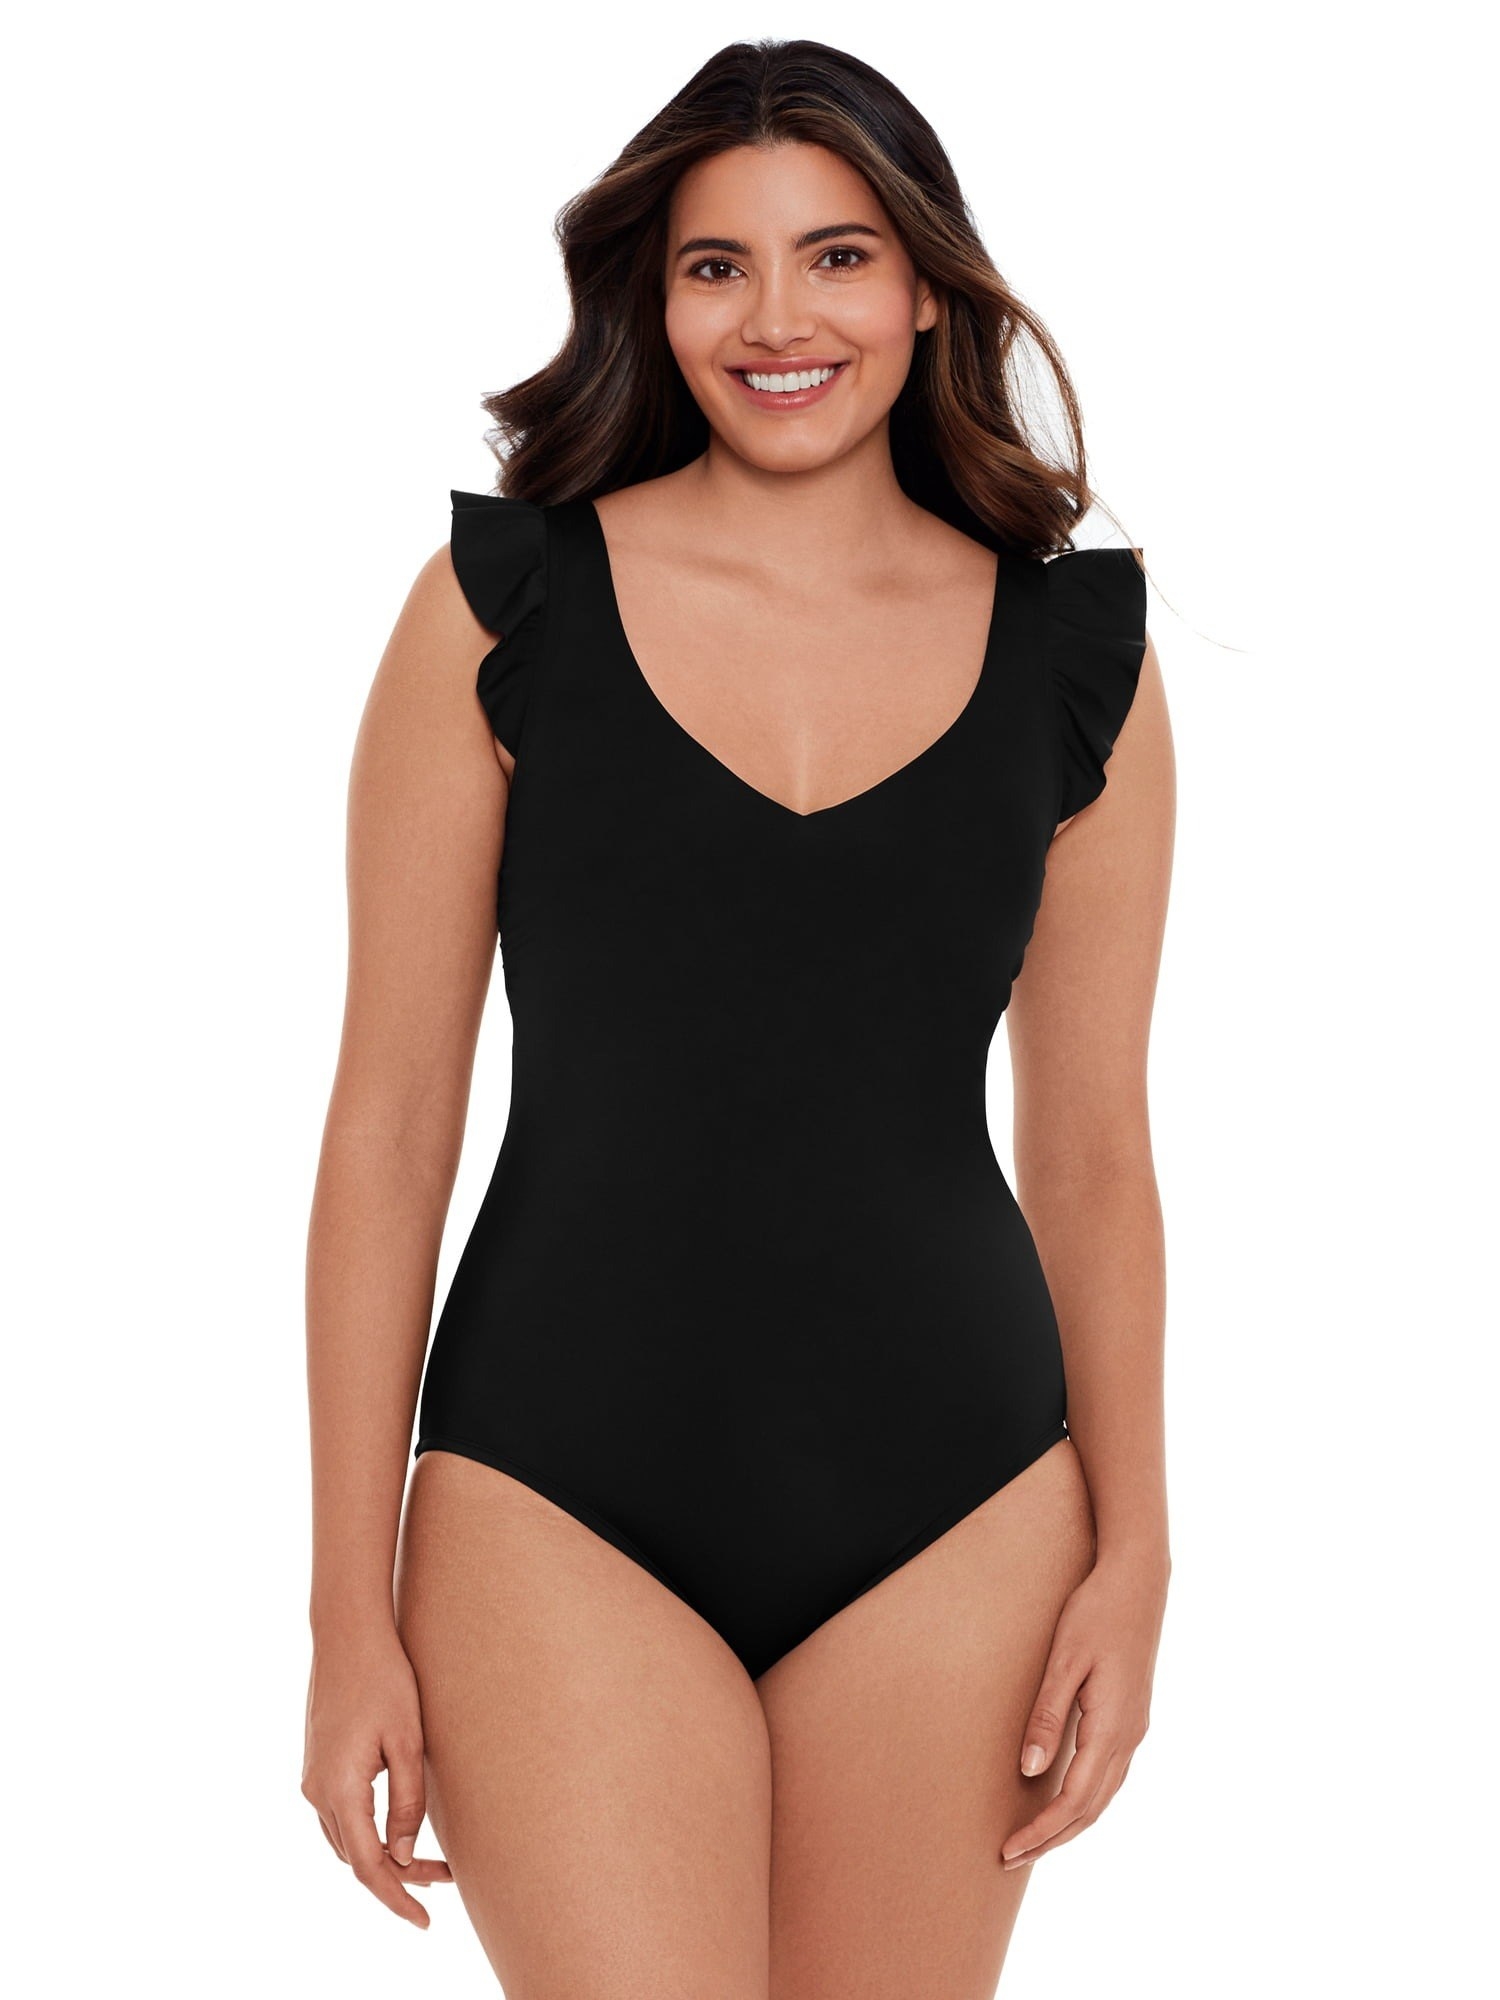 Model wearing black one-piece with ruffle sleeves